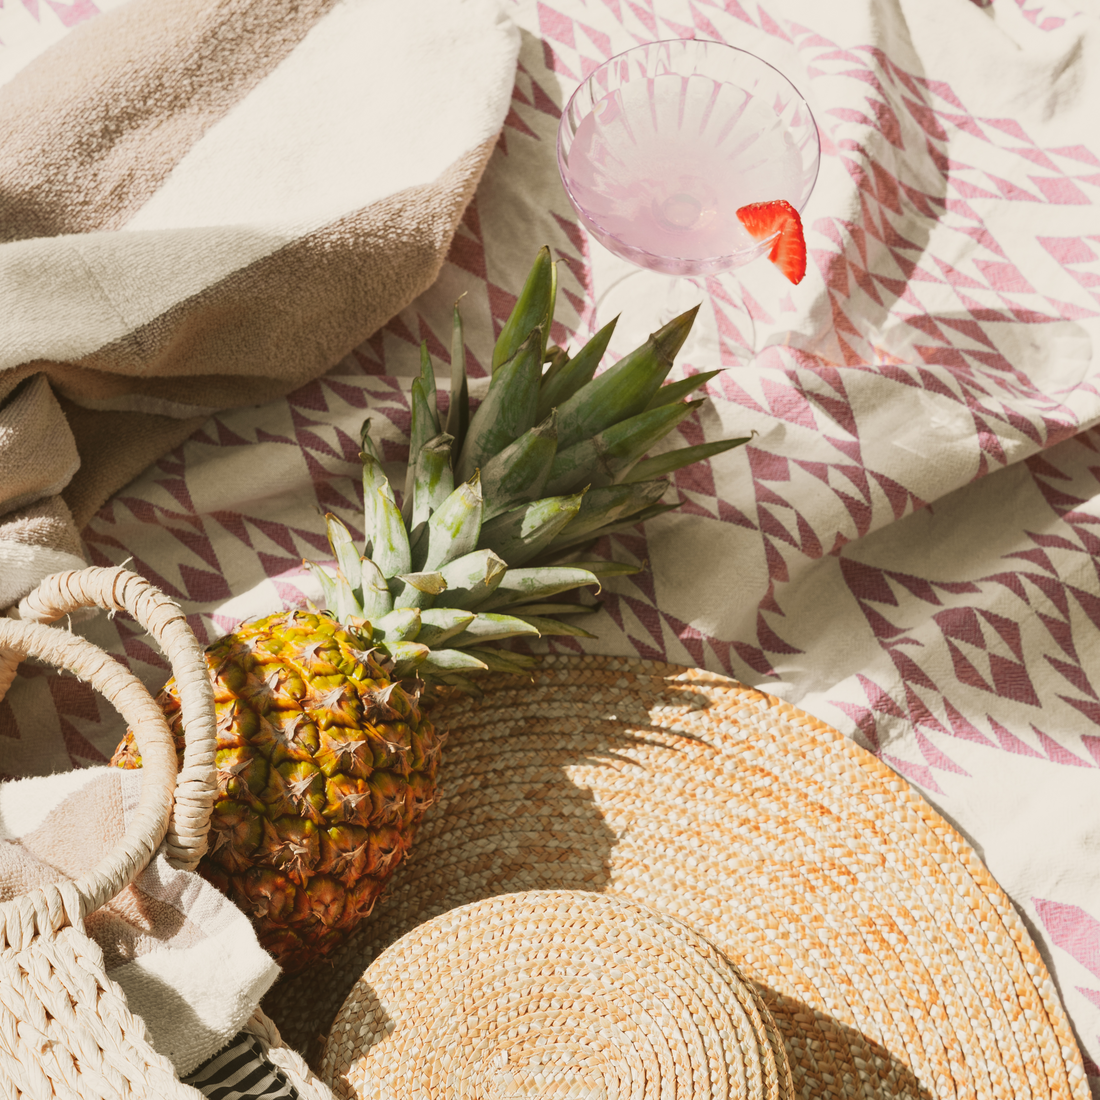 Modern poolside image with a pineapple, beach hat, and refreshing beverage.